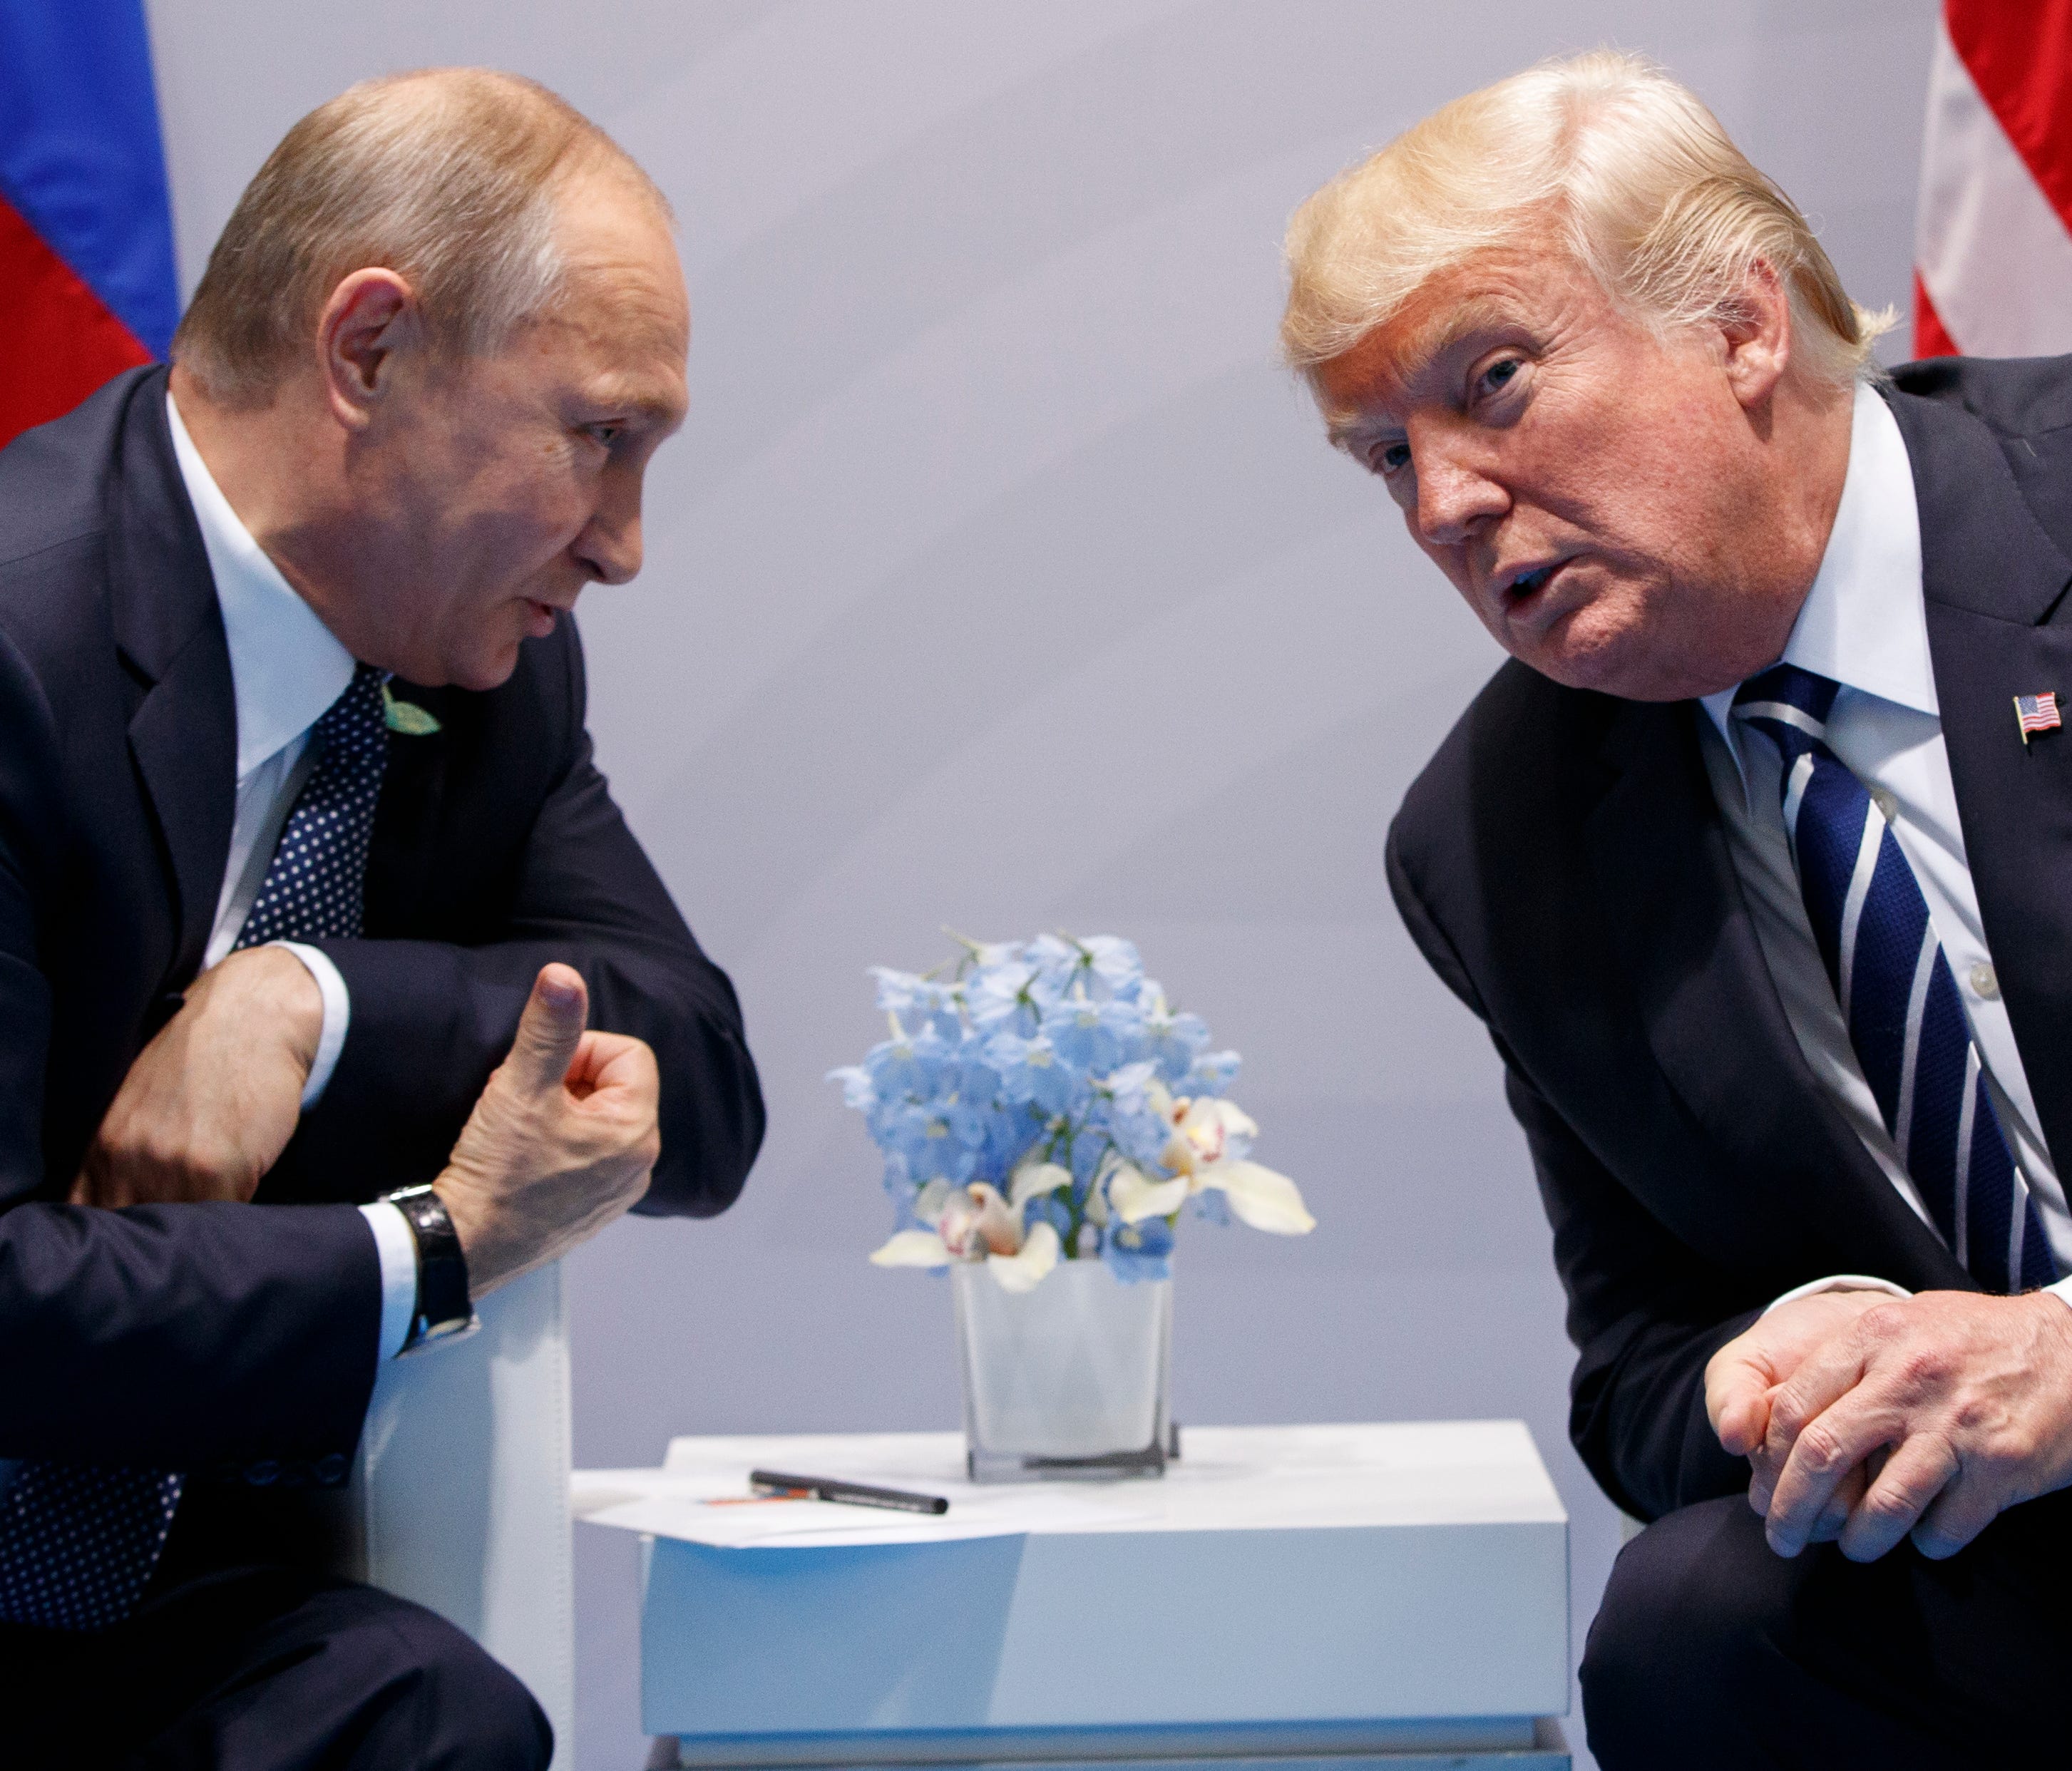 In this July 7, 2017 file photo, President Trump meets with Russian President Vladimir Putin at the G20 Summit in Hamburg, Germany.